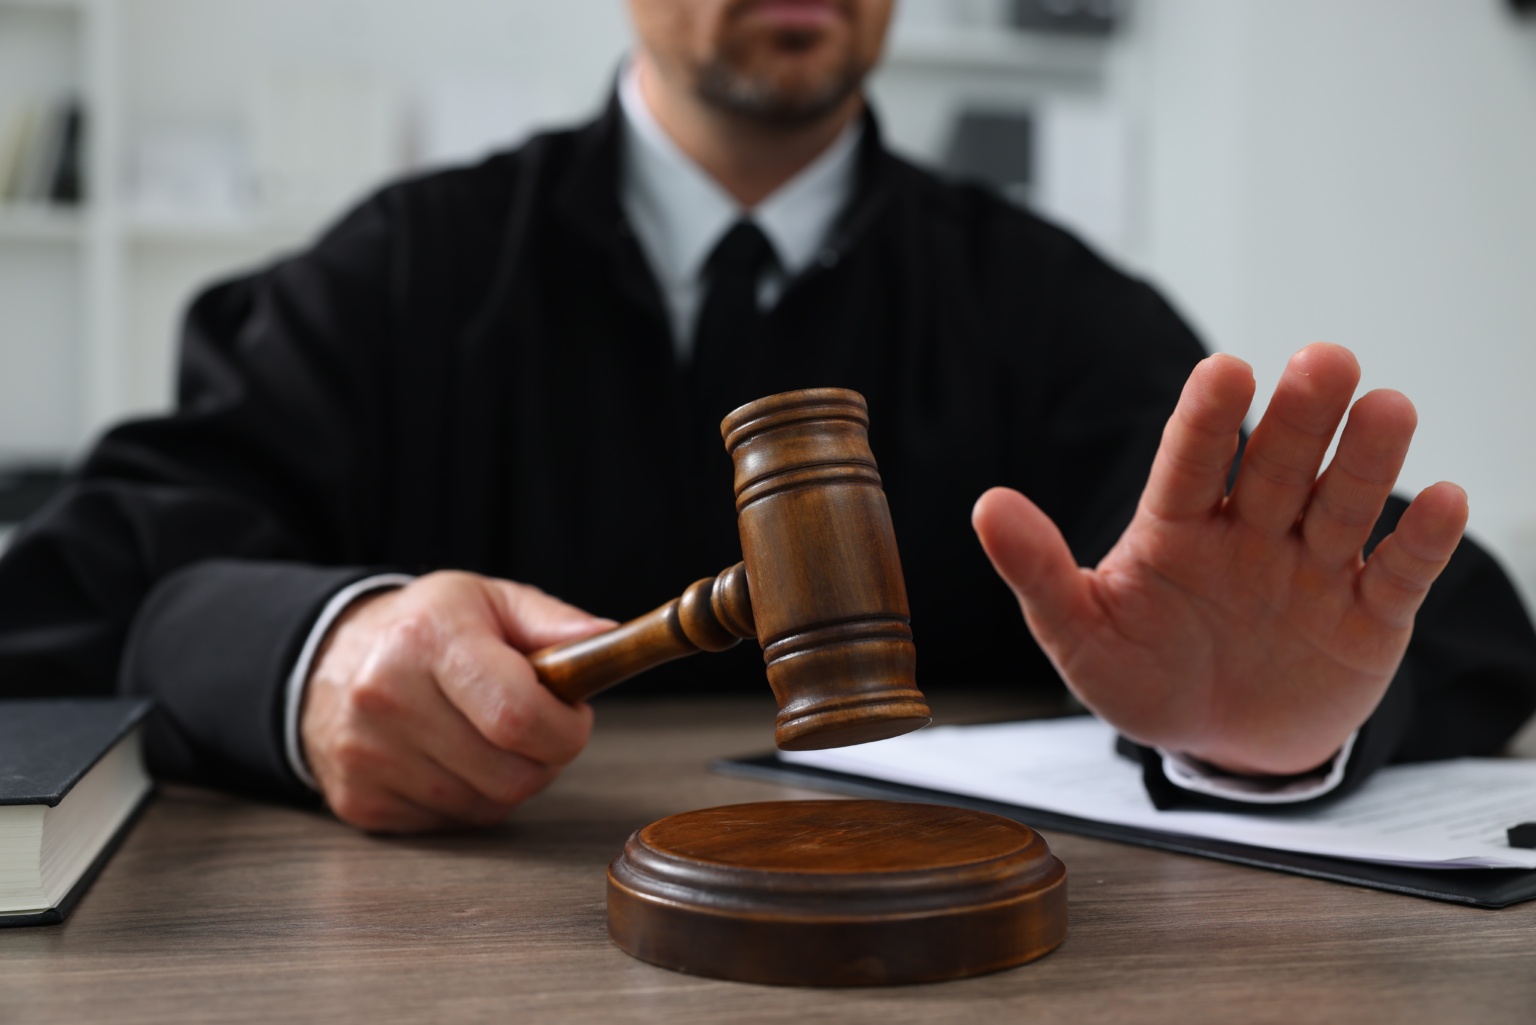 Should You Plead Guilty or not guilty?